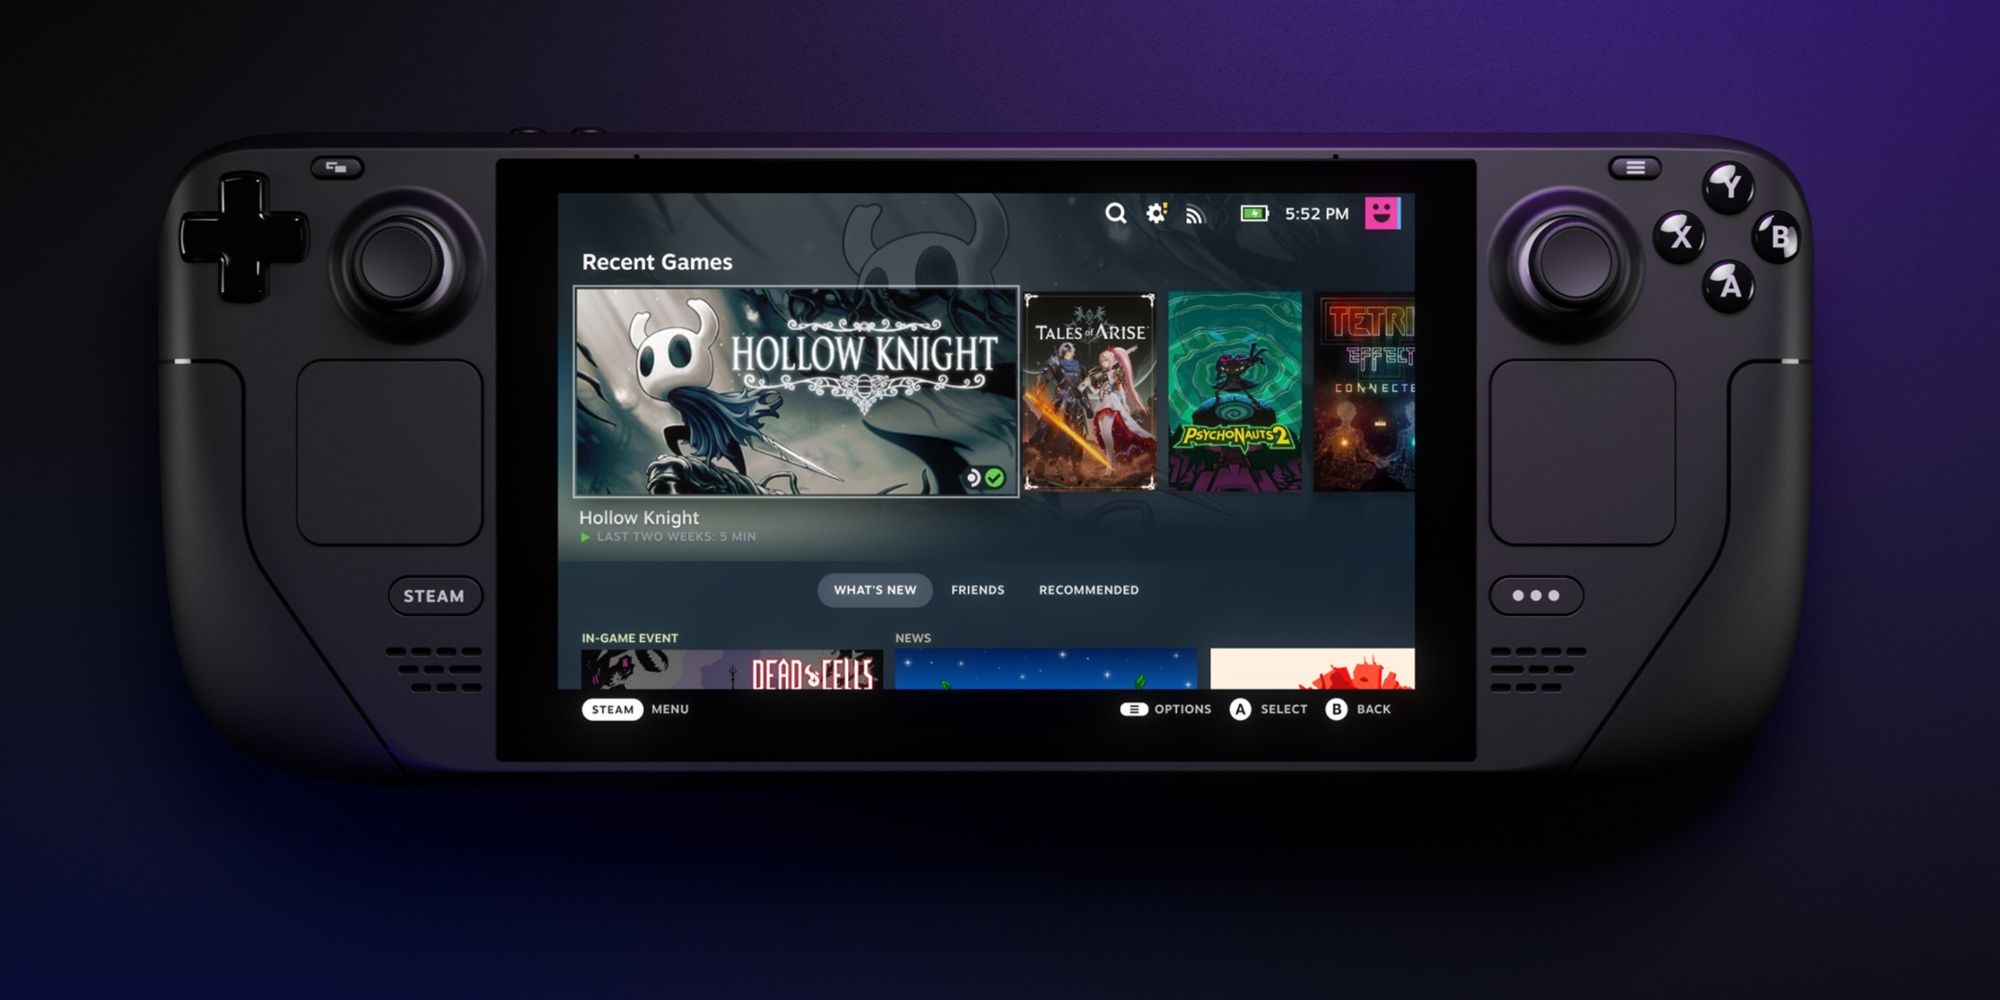 Steam Deck console on its home screen